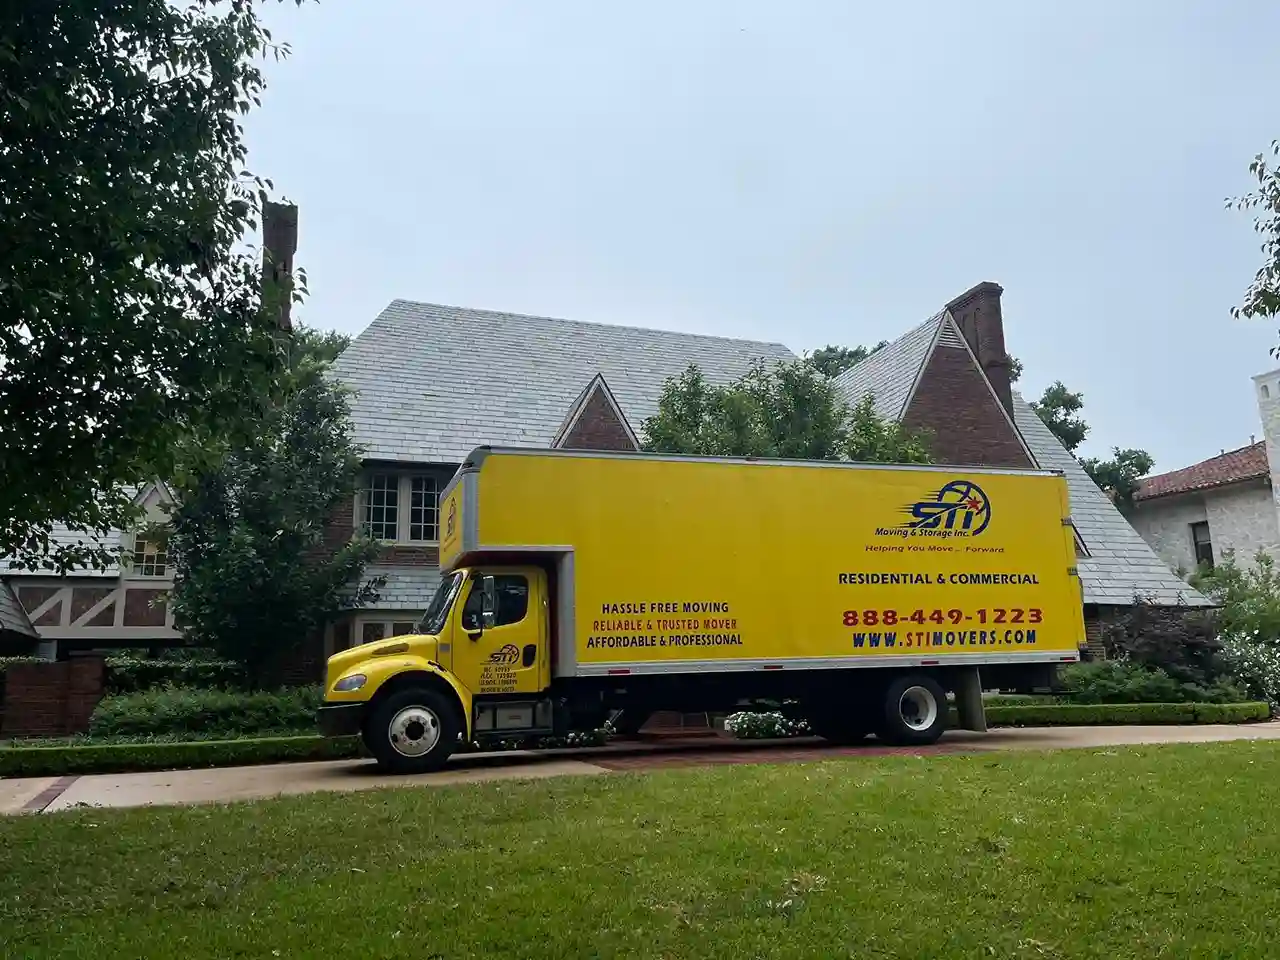 Relocate with Trustworthy Northbrook Movers